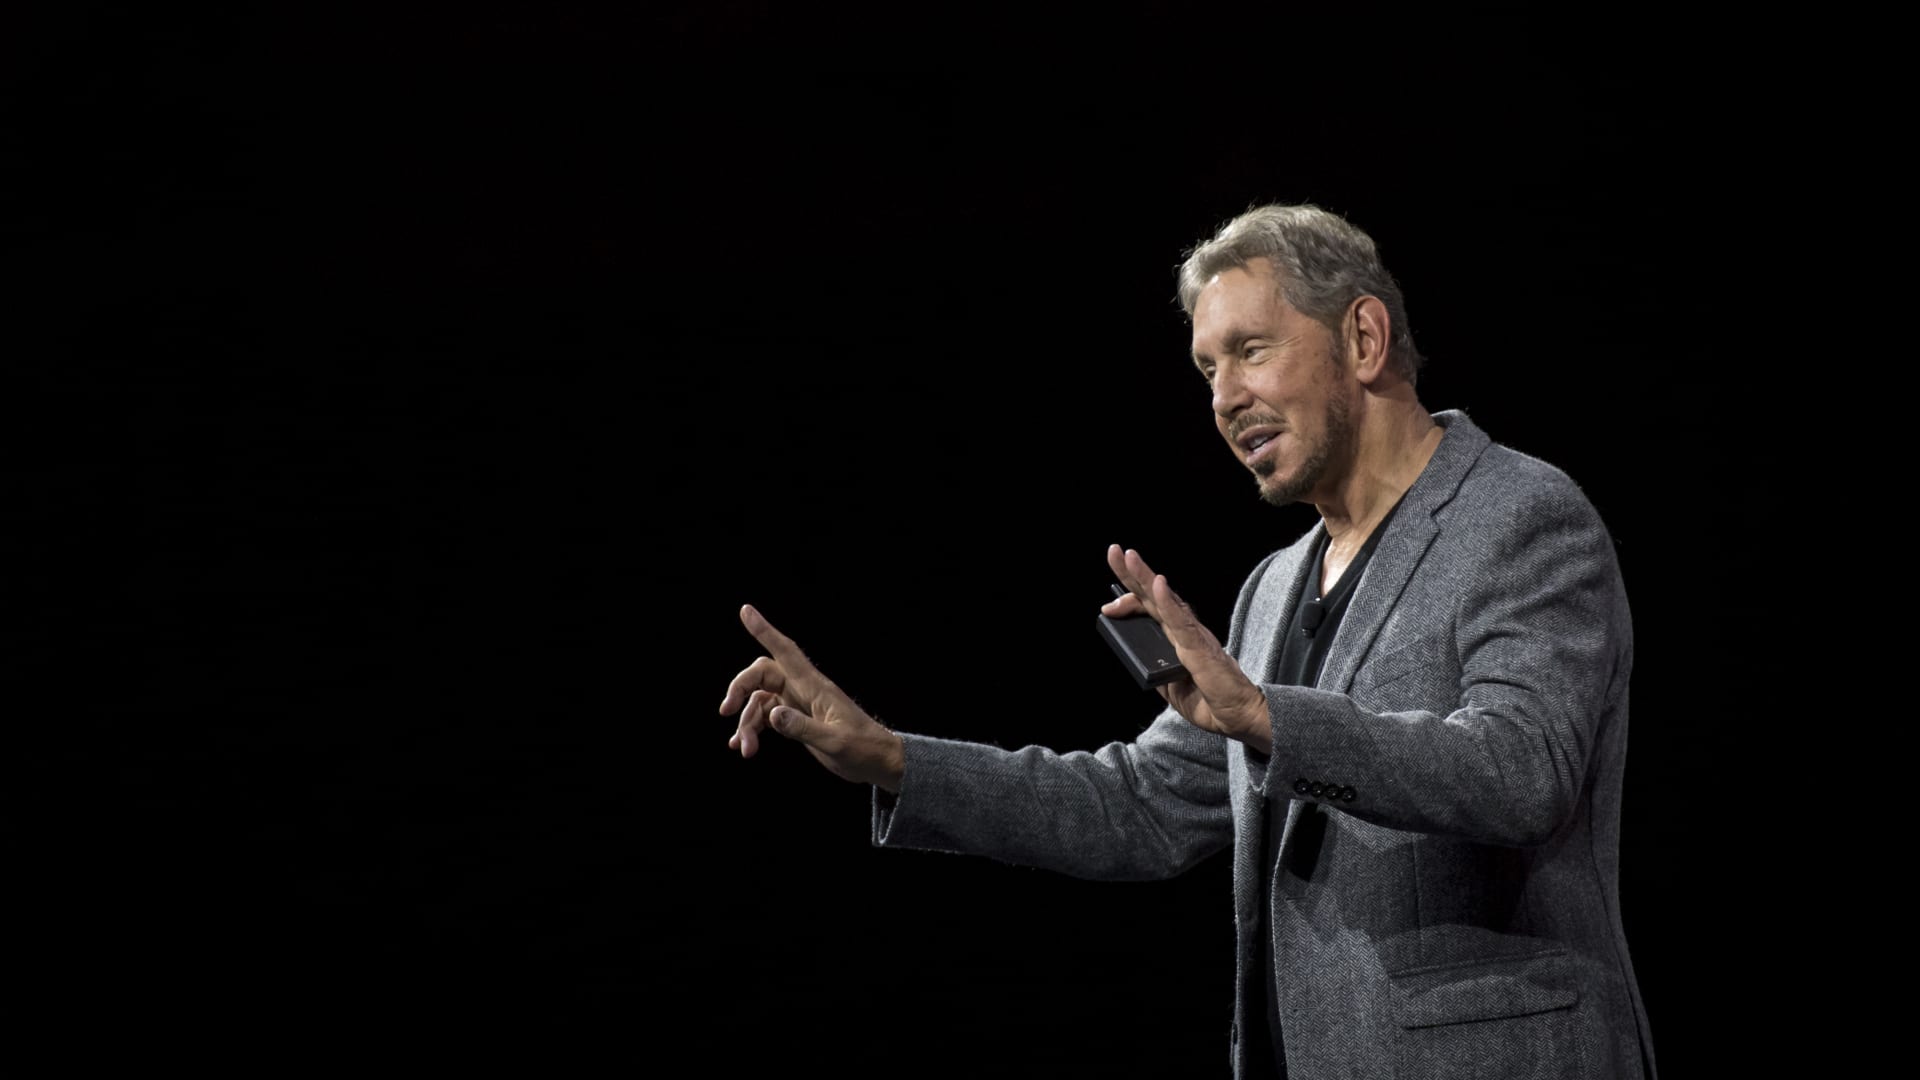 Larry Ellison, co-founder and executive chairman of Oracle Corp., speaks during the Oracle OpenWorld conference in San Francisco on Oct. 22, 2018.